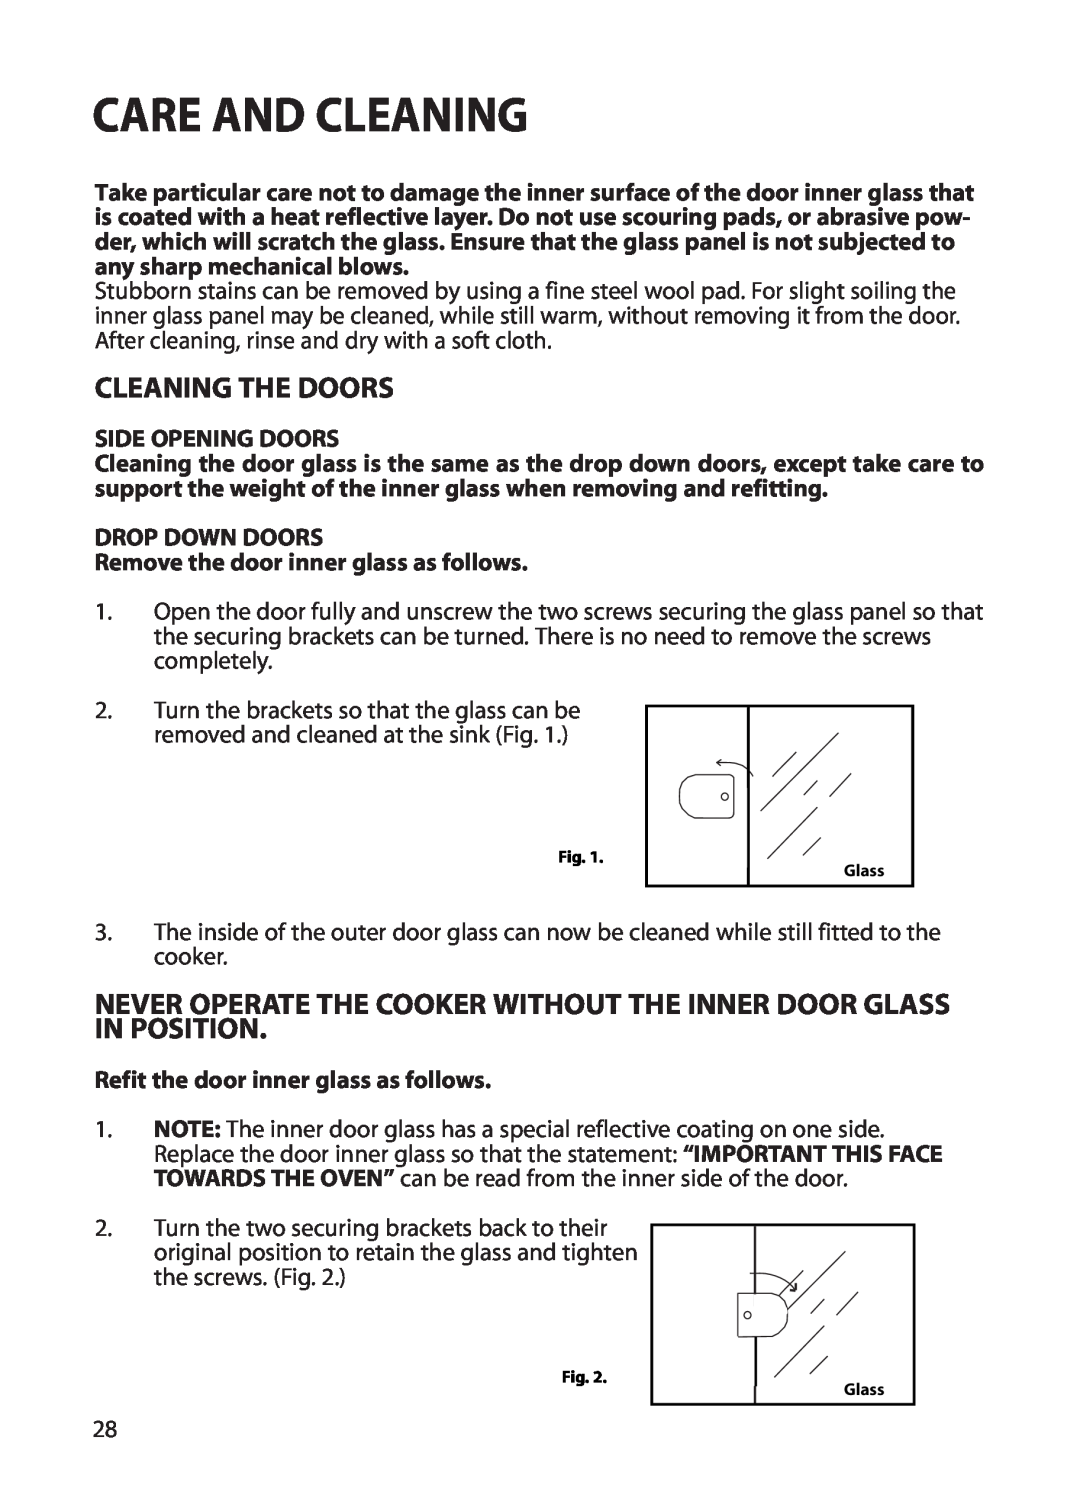 Creda REFLECTION manual Care And Cleaning, Cleaning The Doors 